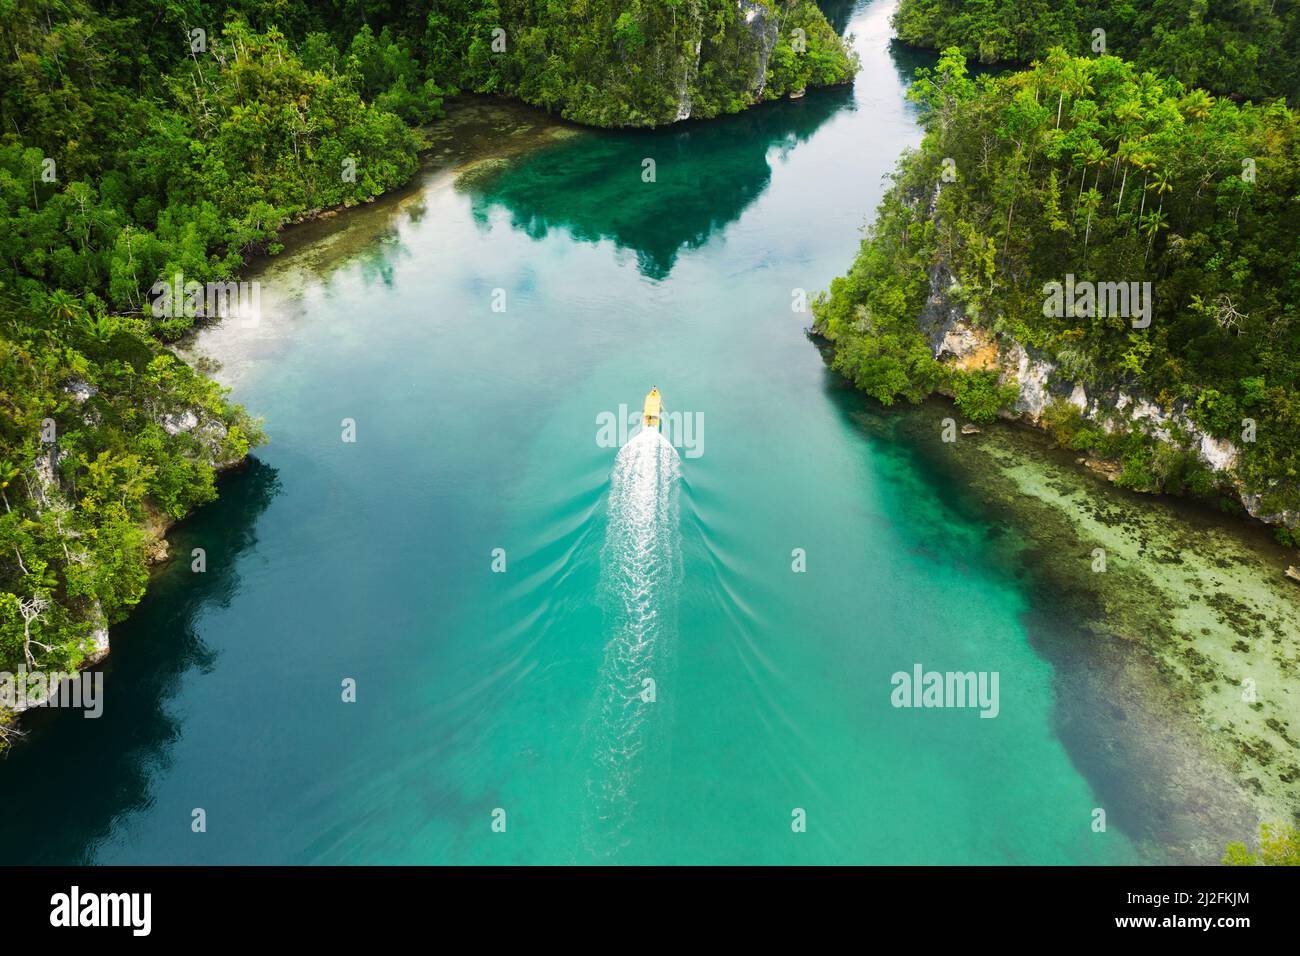 Theres so much beauty found out here. High angle shot of a boat sailing through a canal running along the Raja Ampat Islands in Indonesia. Stock Photo